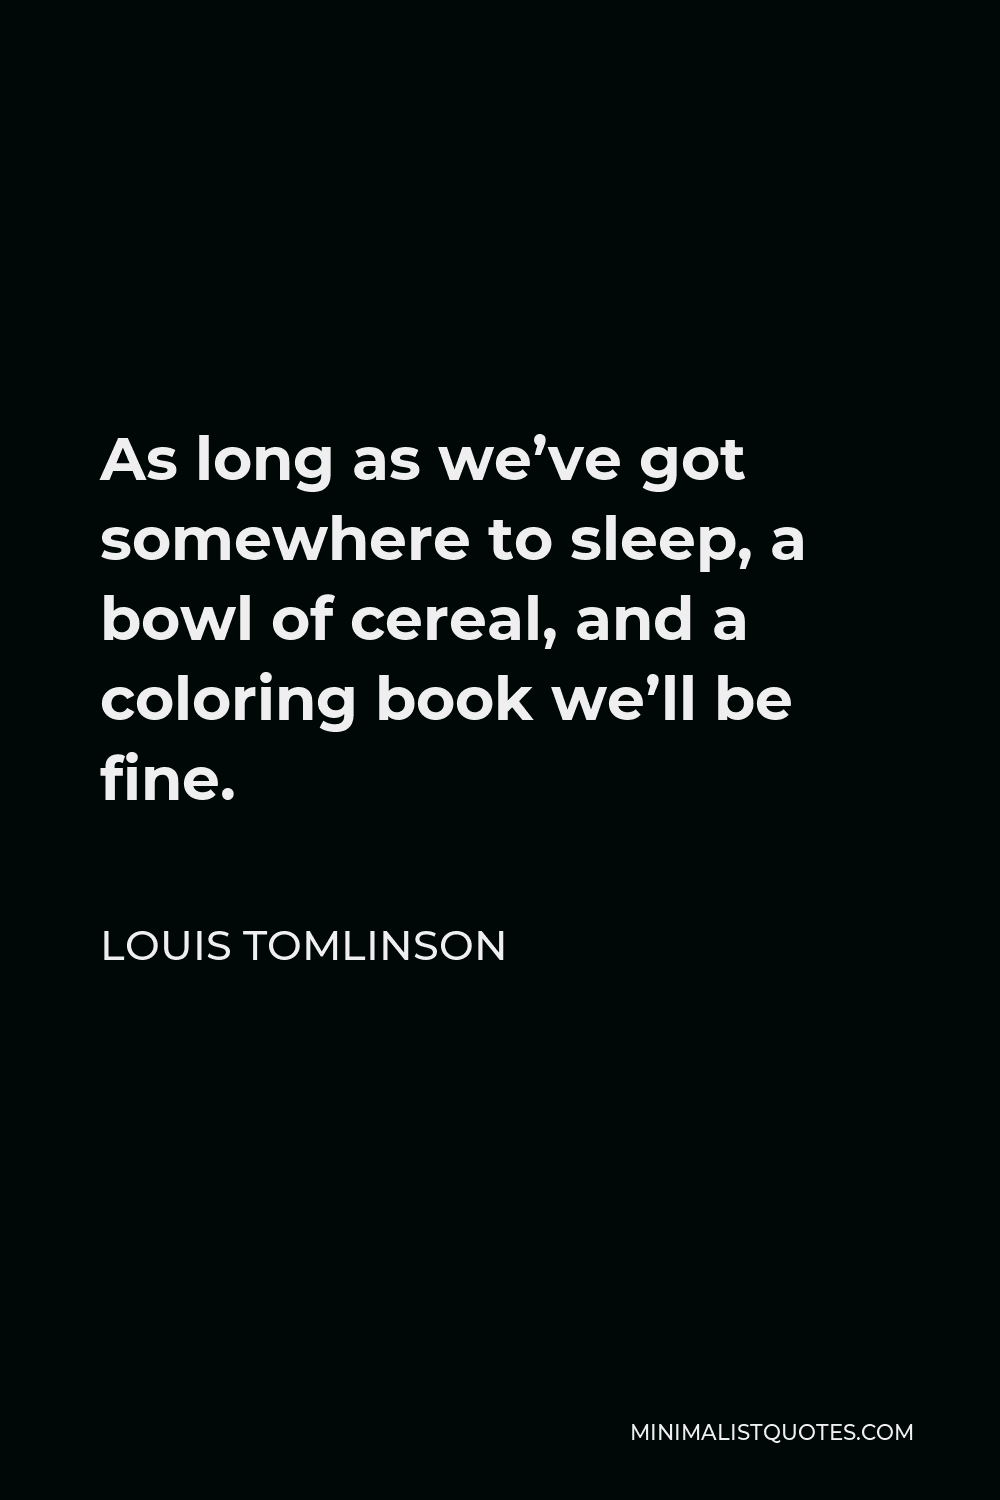 Louis Tomlinson Quote - As long as we’ve got somewhere to sleep, a bowl of cereal, and a coloring book we’ll be fine.